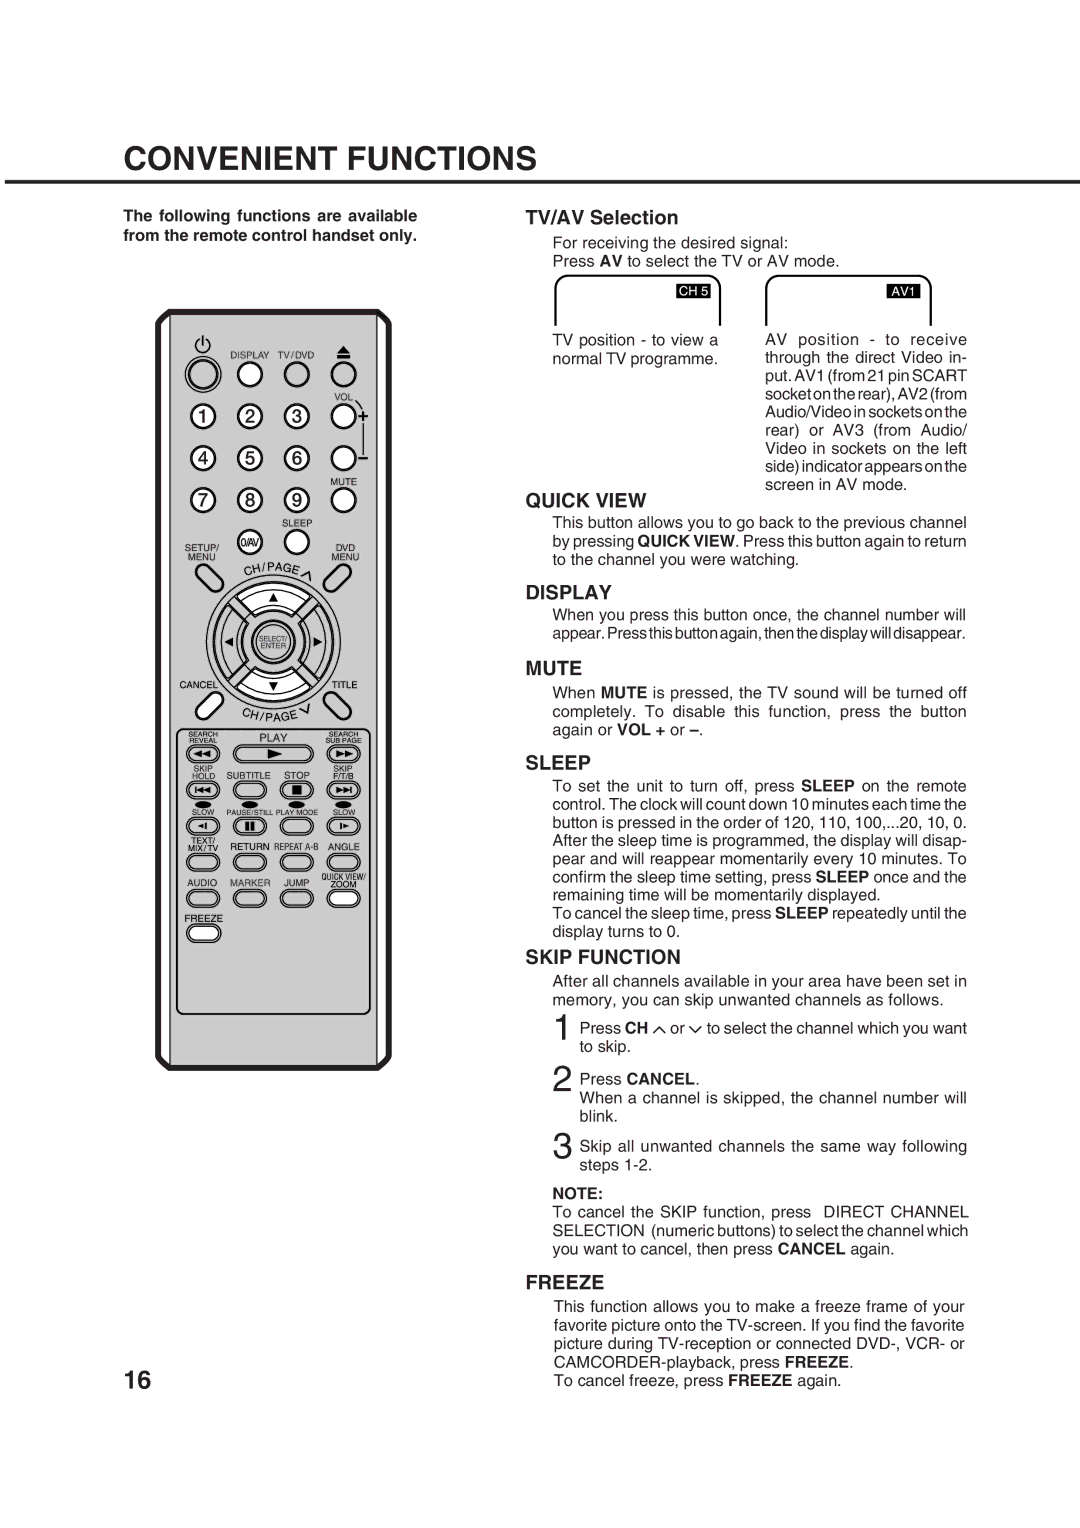 Orion 14LD manual Convenient Functions, TV/AV Selection 